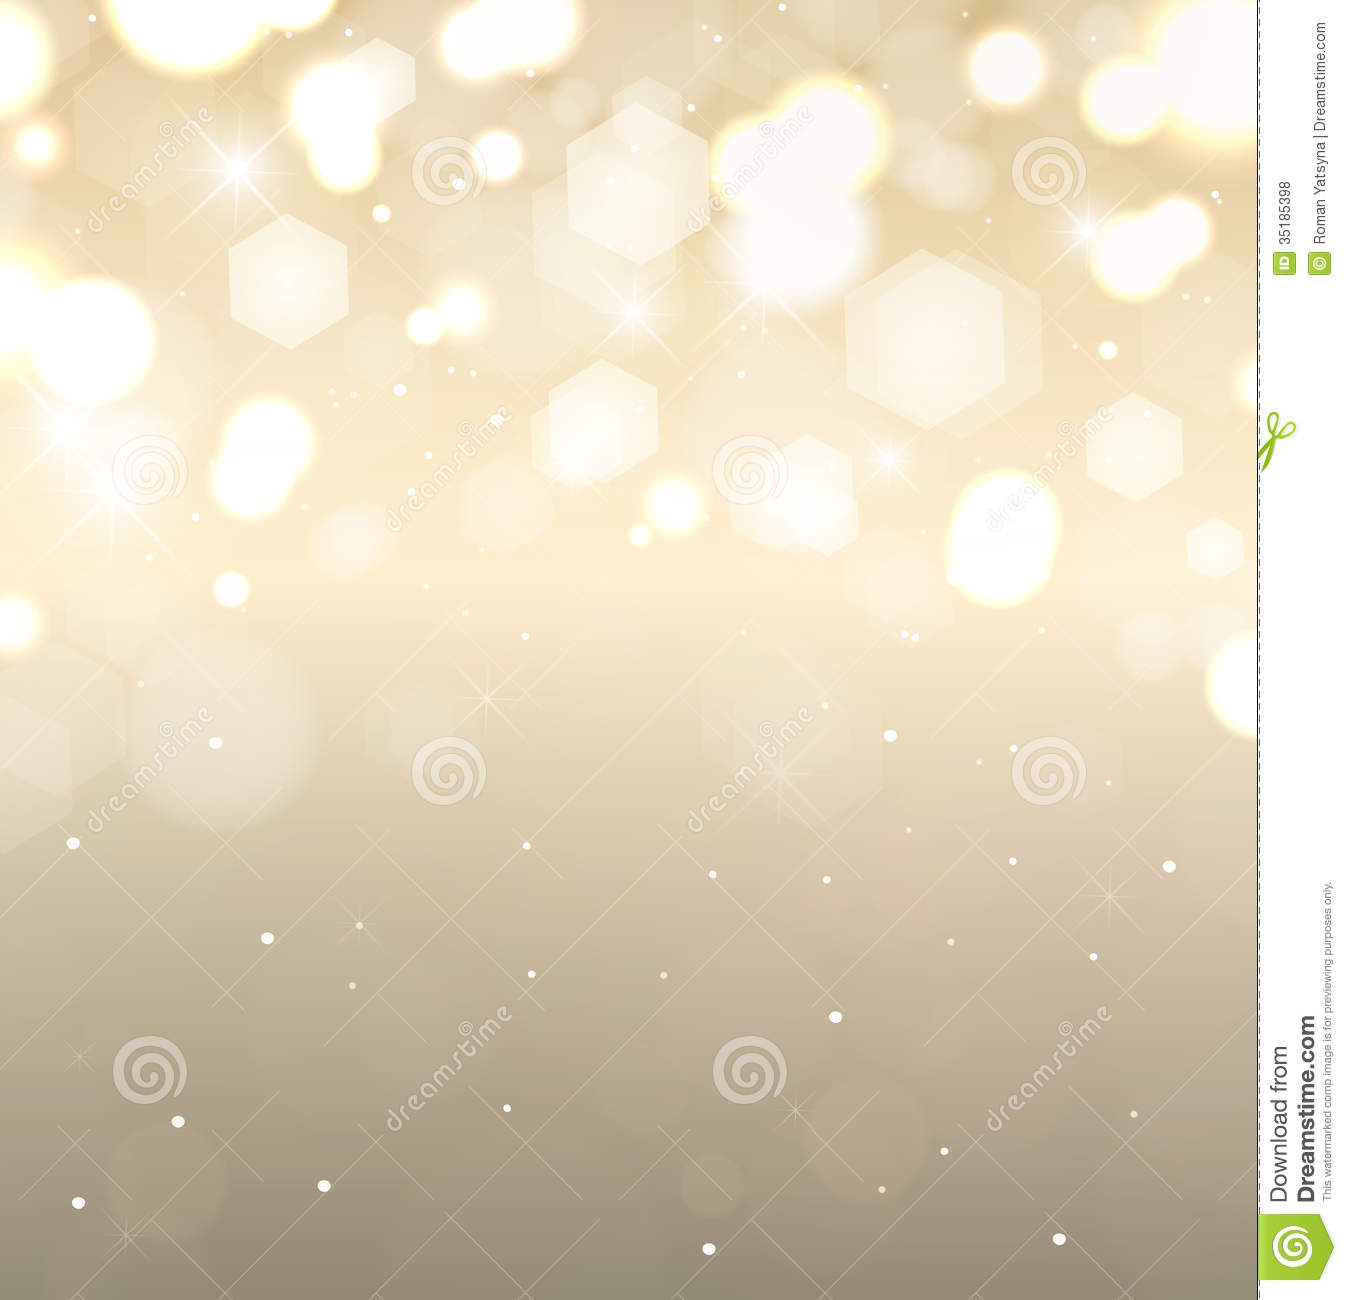 Golden Holiday Background  Flickering Lights With Royalty Free Stock